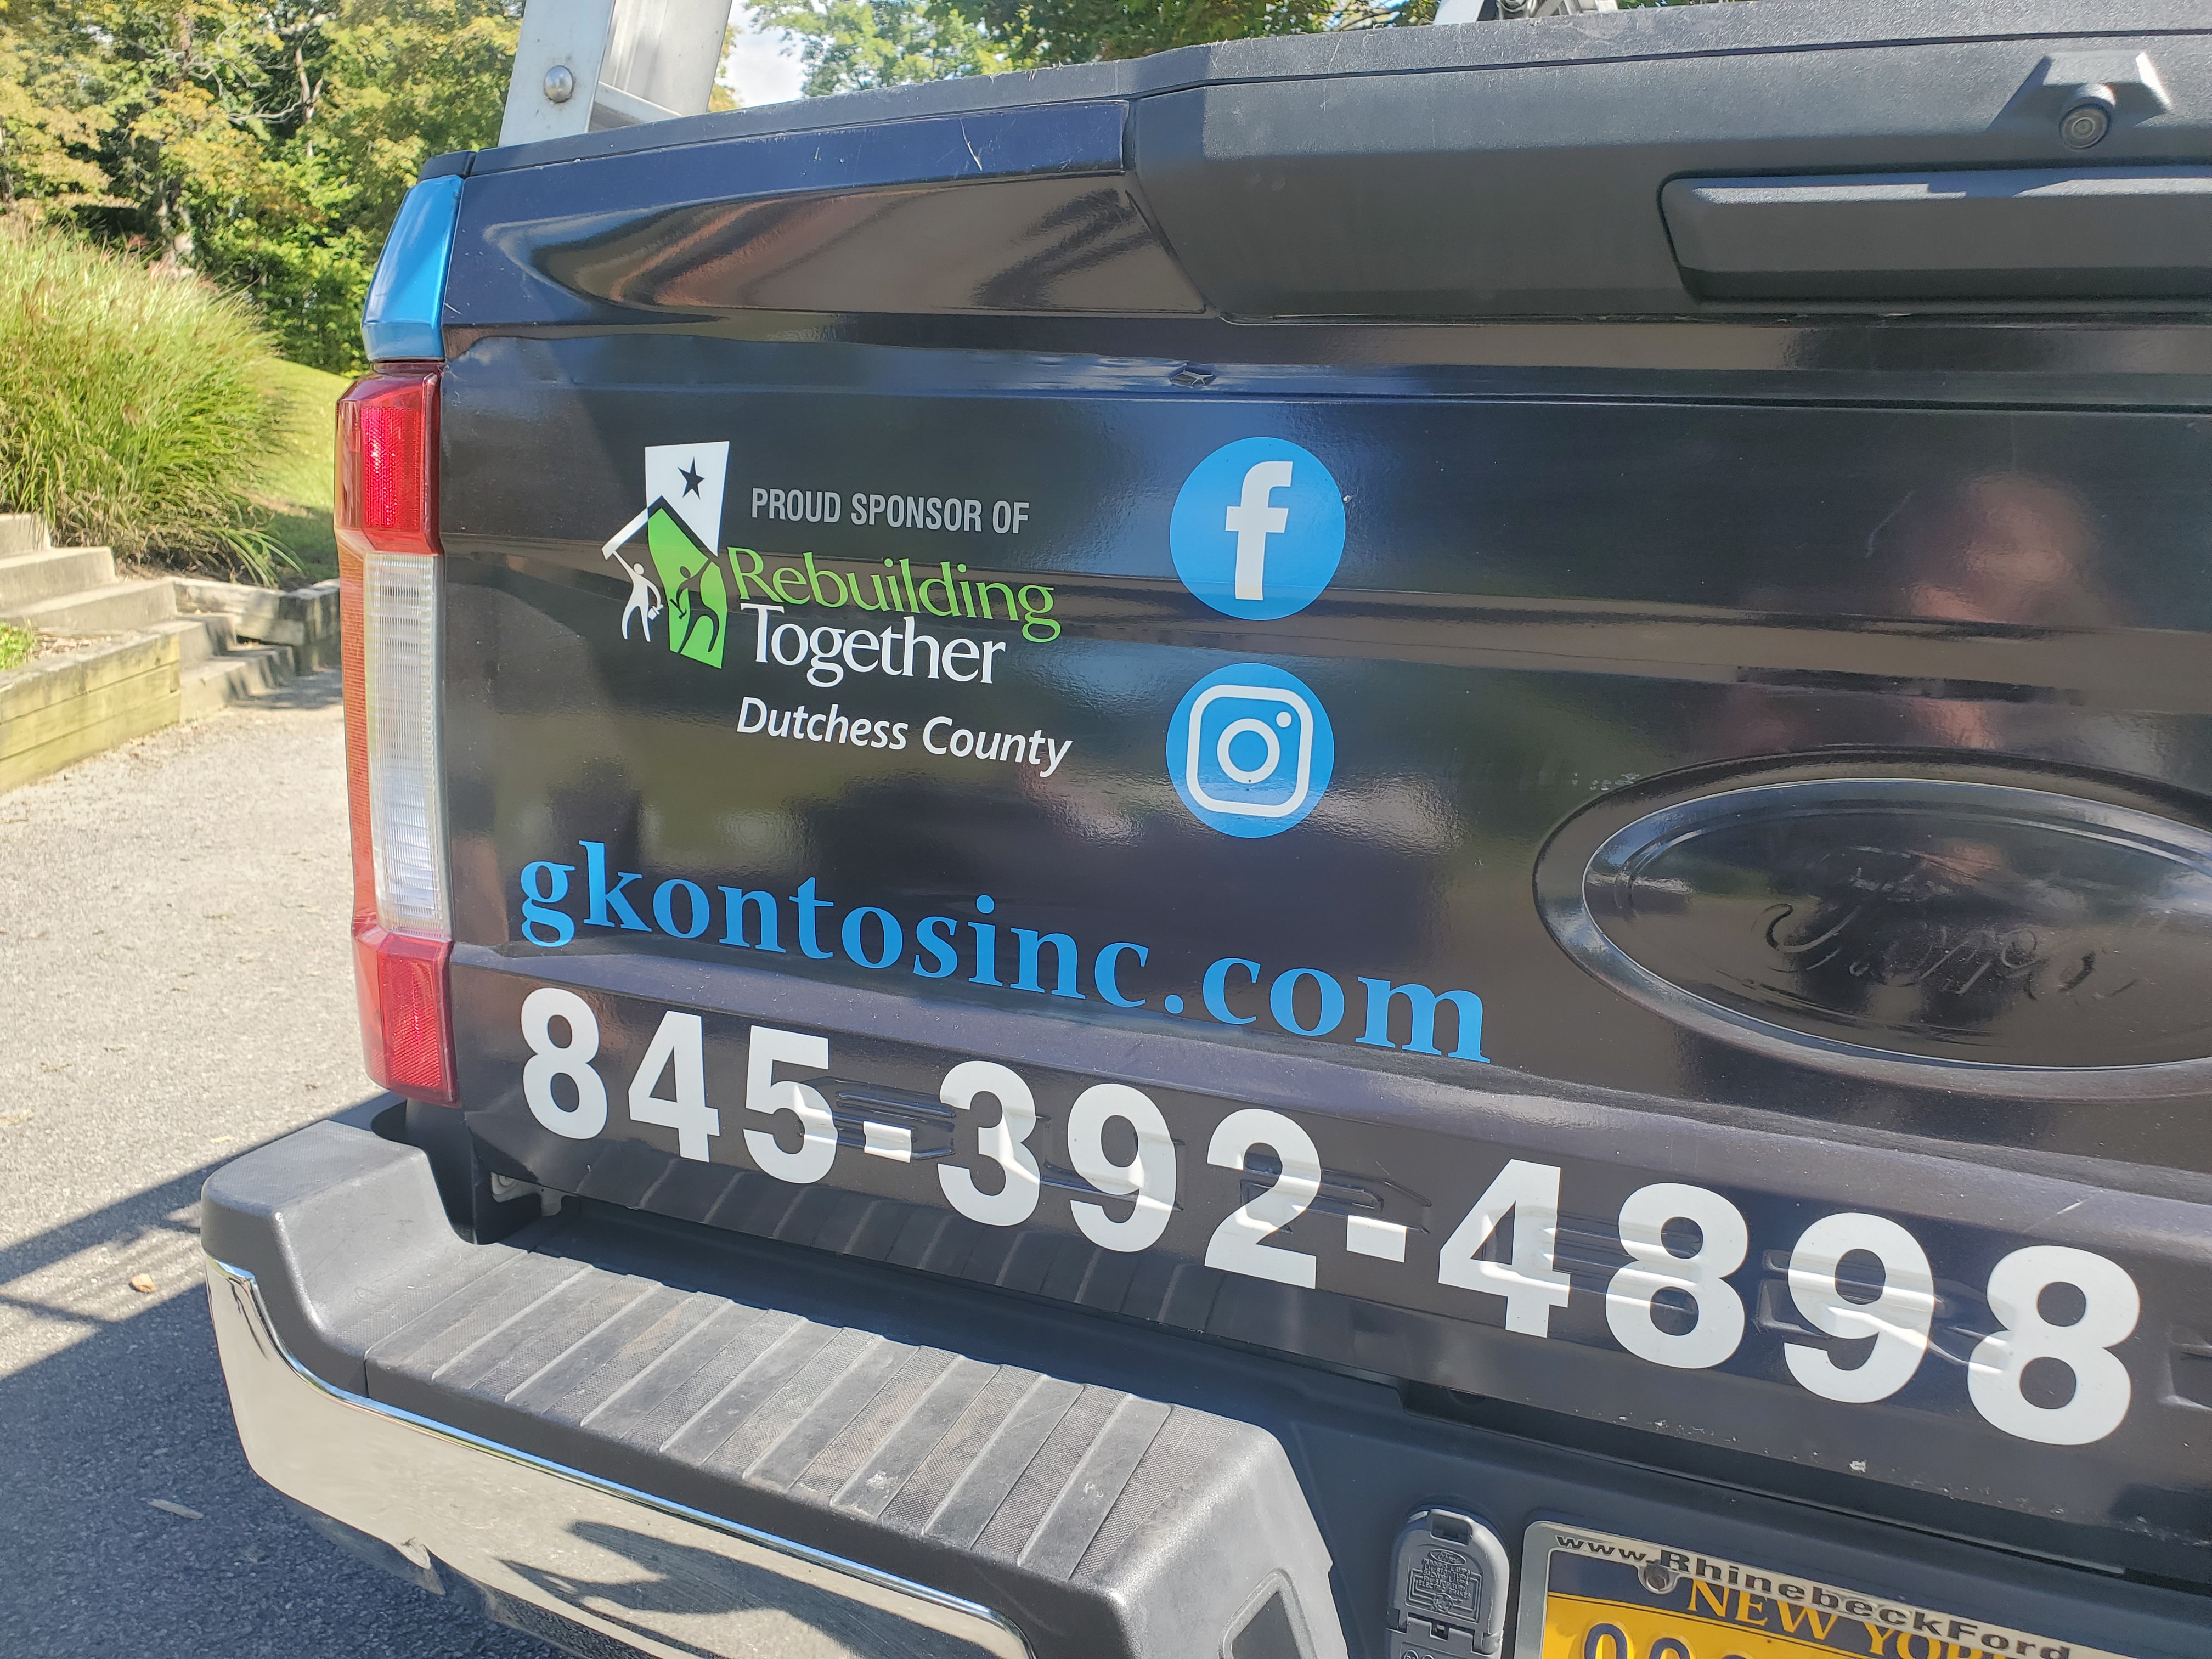 A GKontos truck with the RTDC logo.